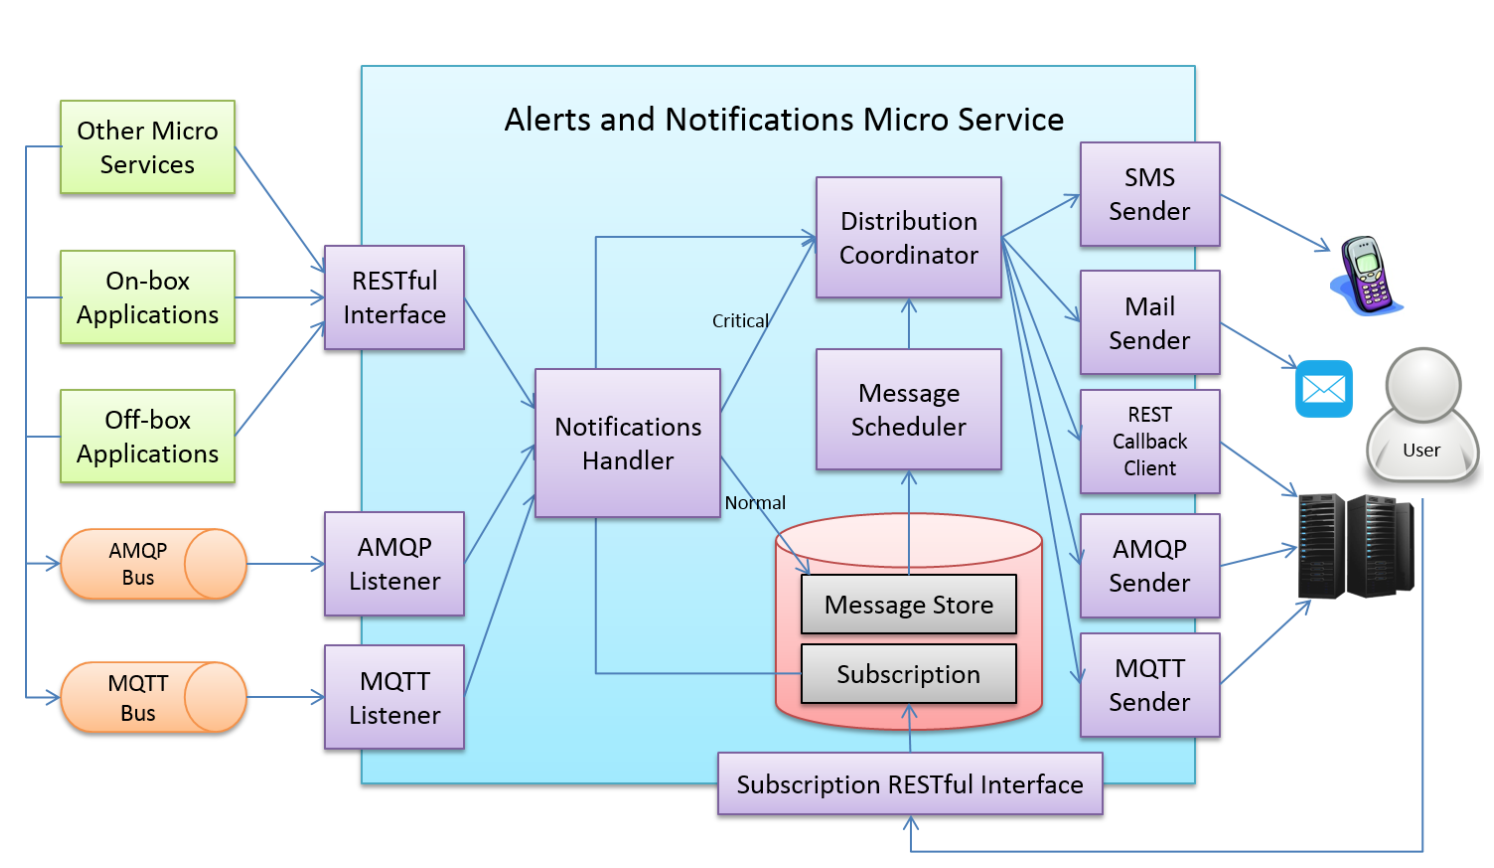 Alerts and Notifications 架构图.png